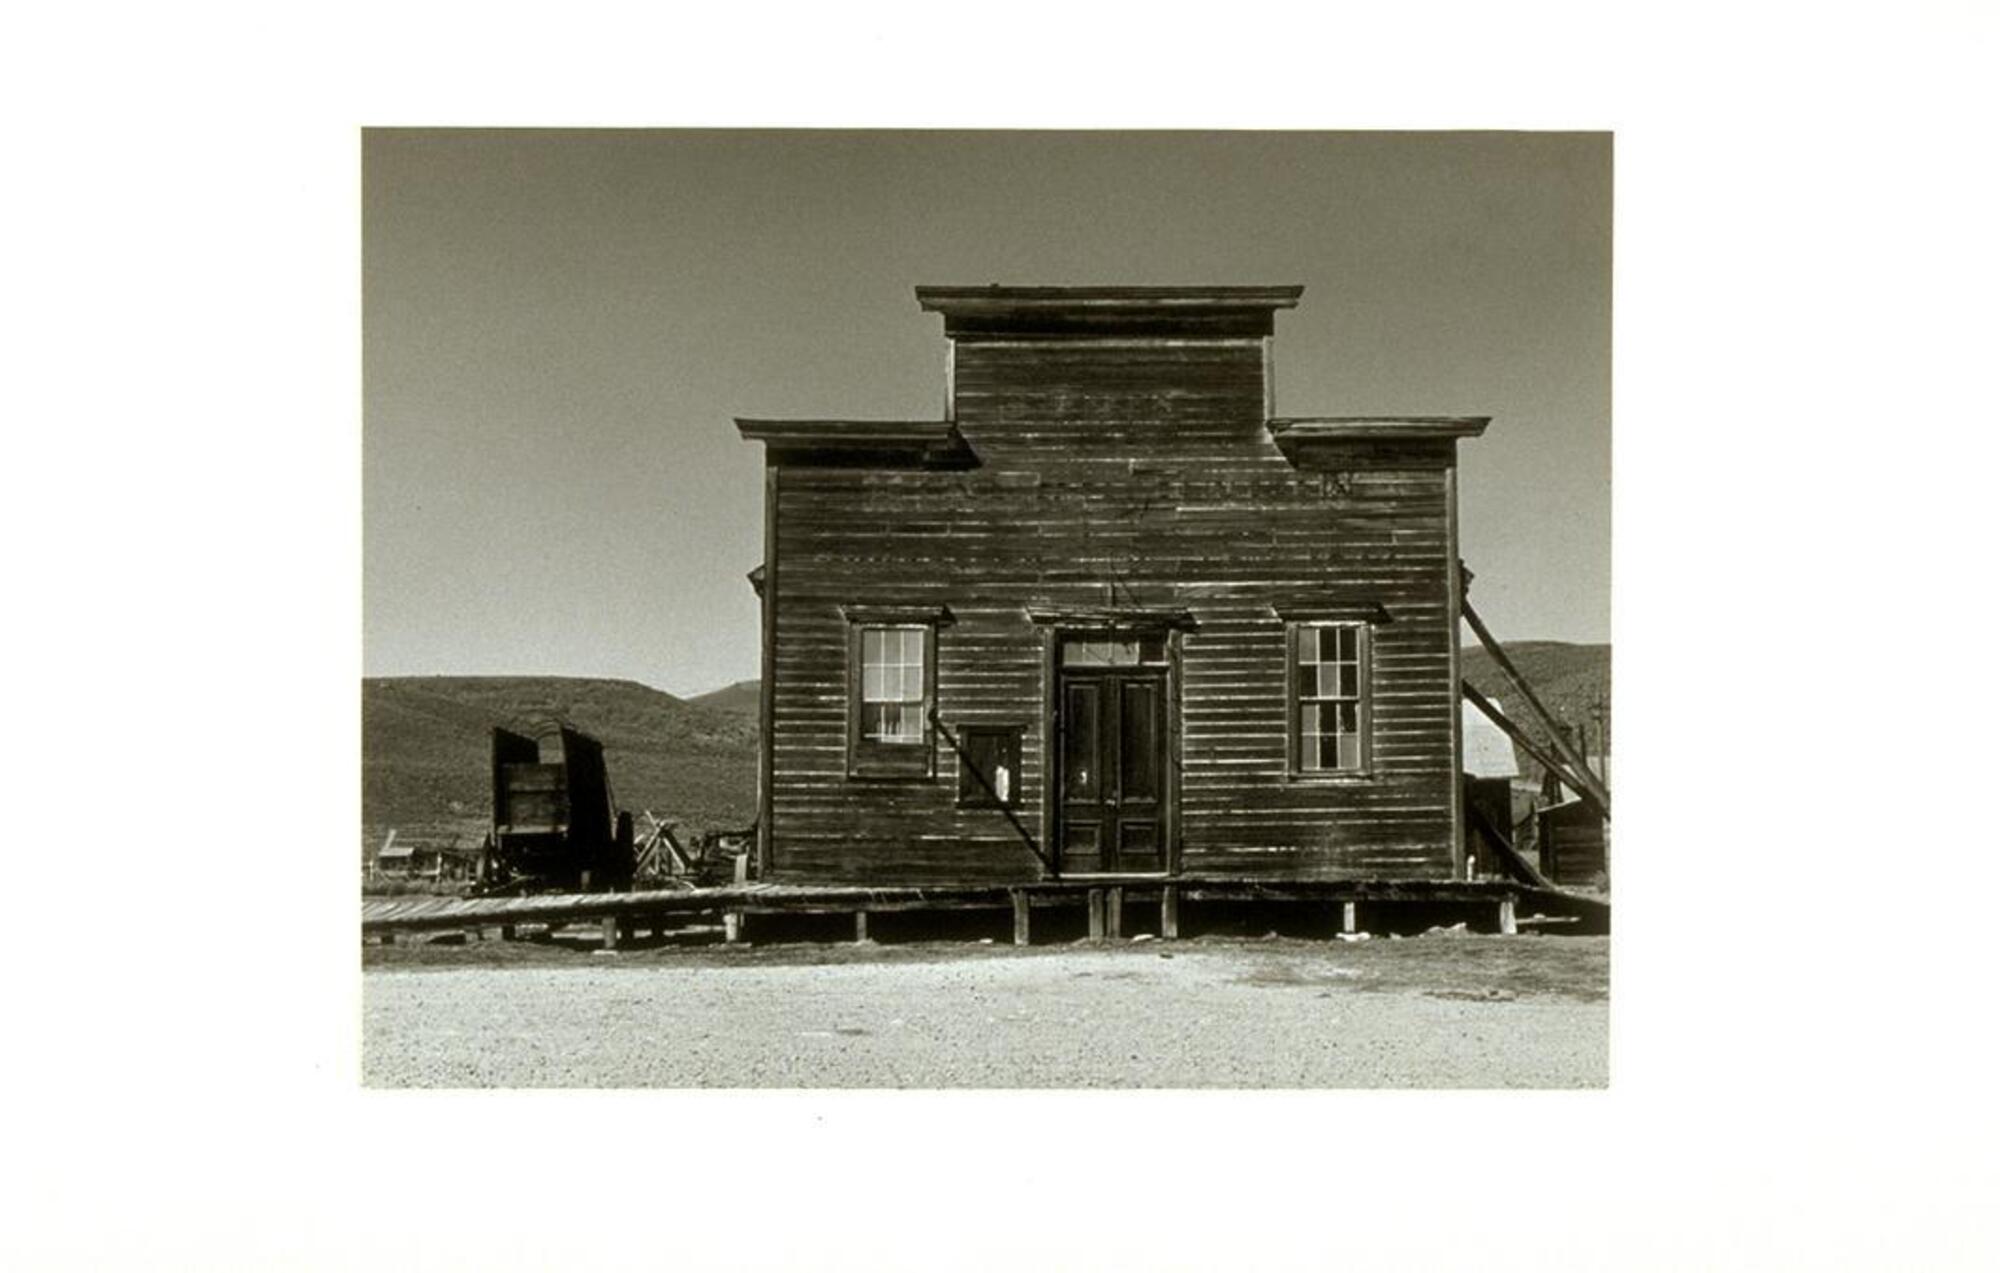 Photograph of a square-shaped wooden building with broken windows and a wagon alongside it.